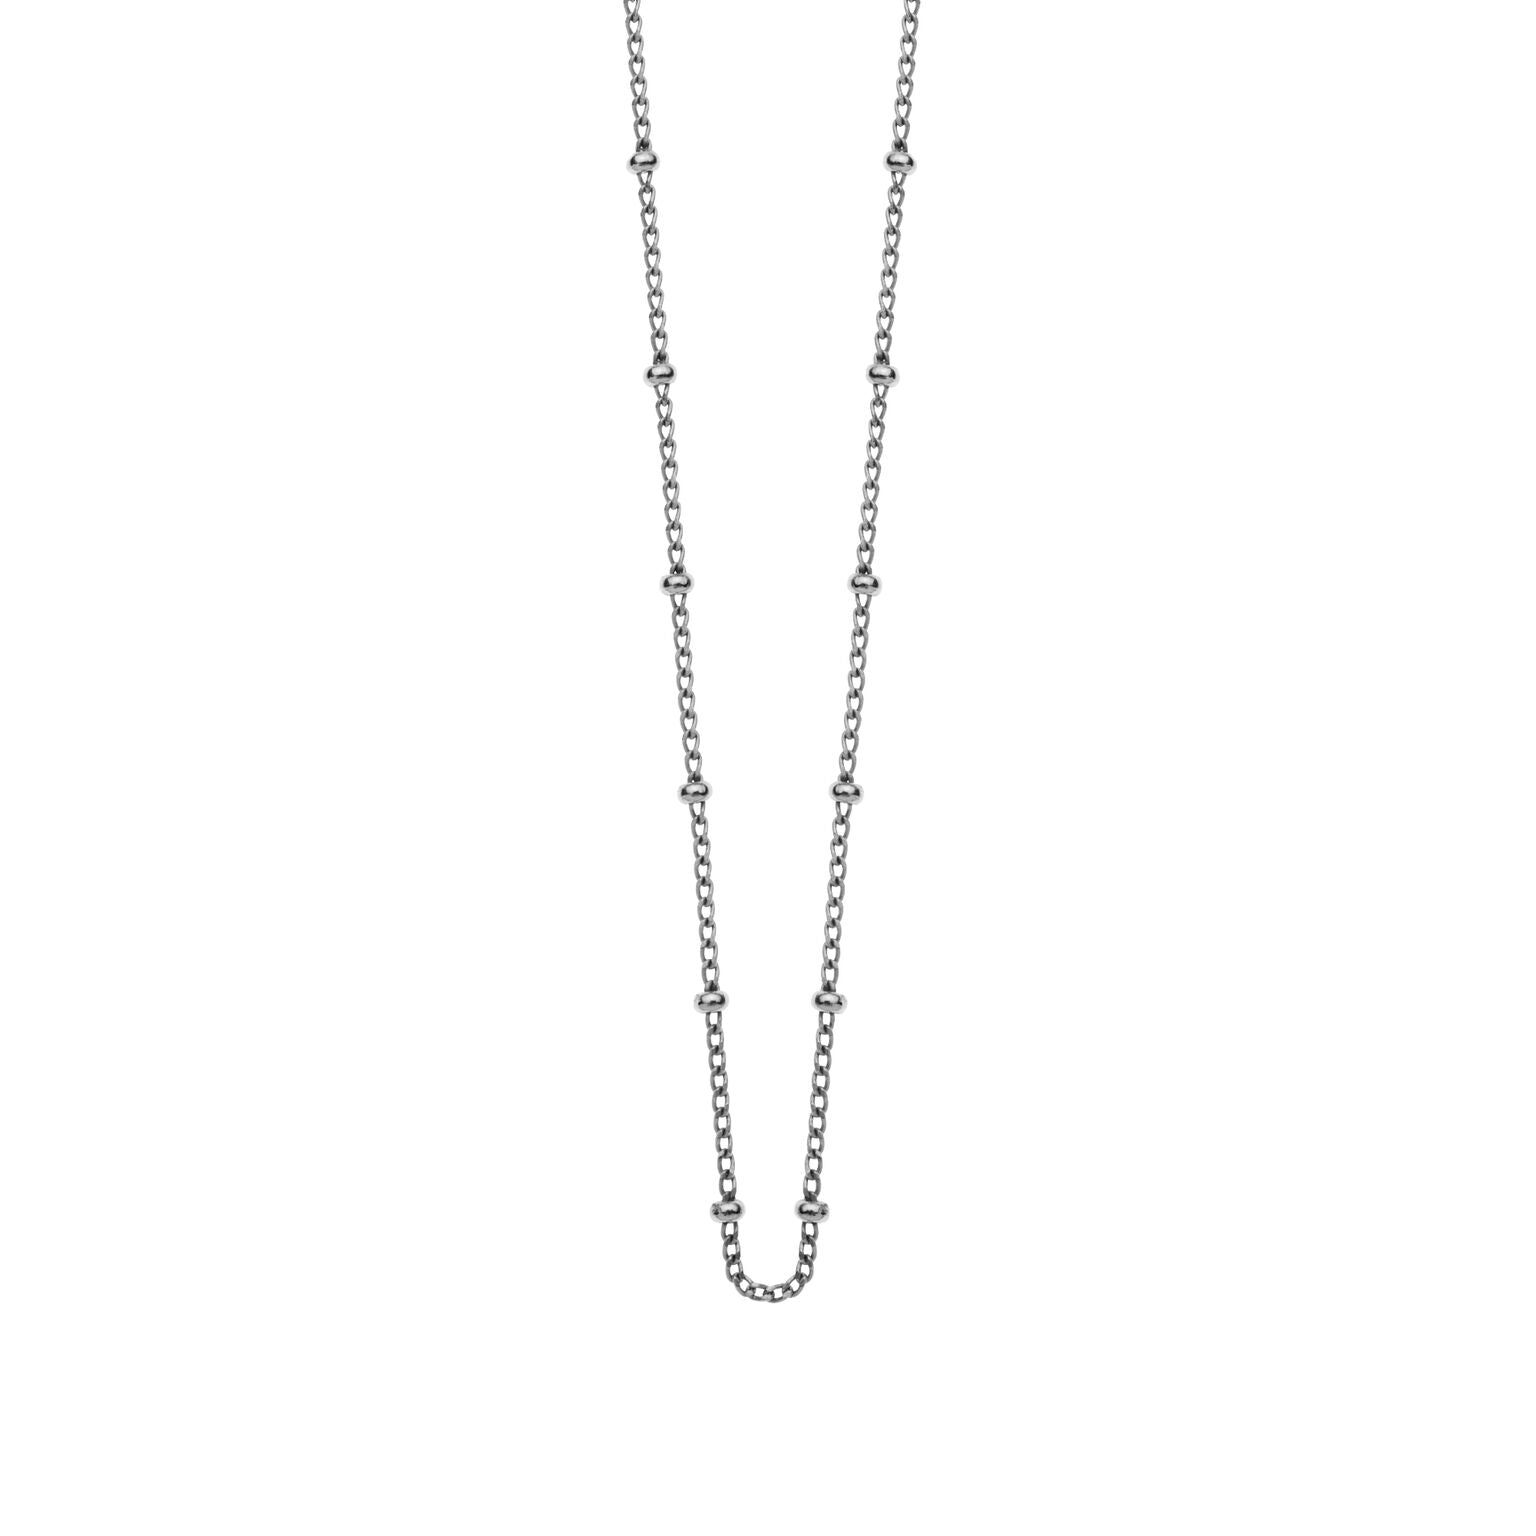 Bespoke Ball Chain Long 22-25" Sterling Silver - ACCESSORIES